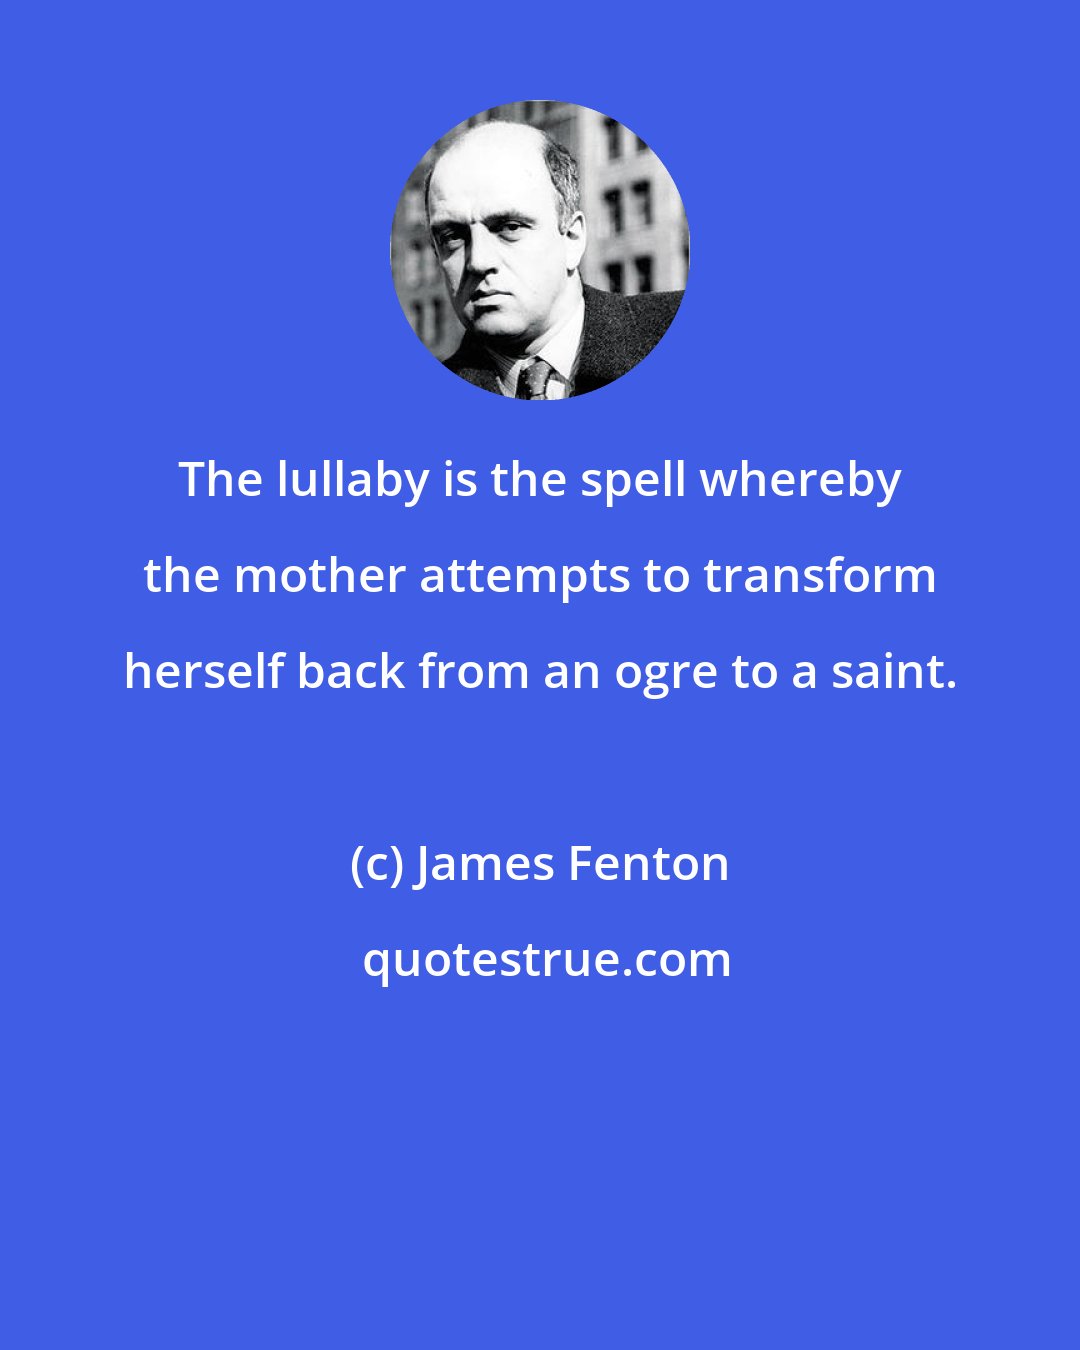 James Fenton: The lullaby is the spell whereby the mother attempts to transform herself back from an ogre to a saint.